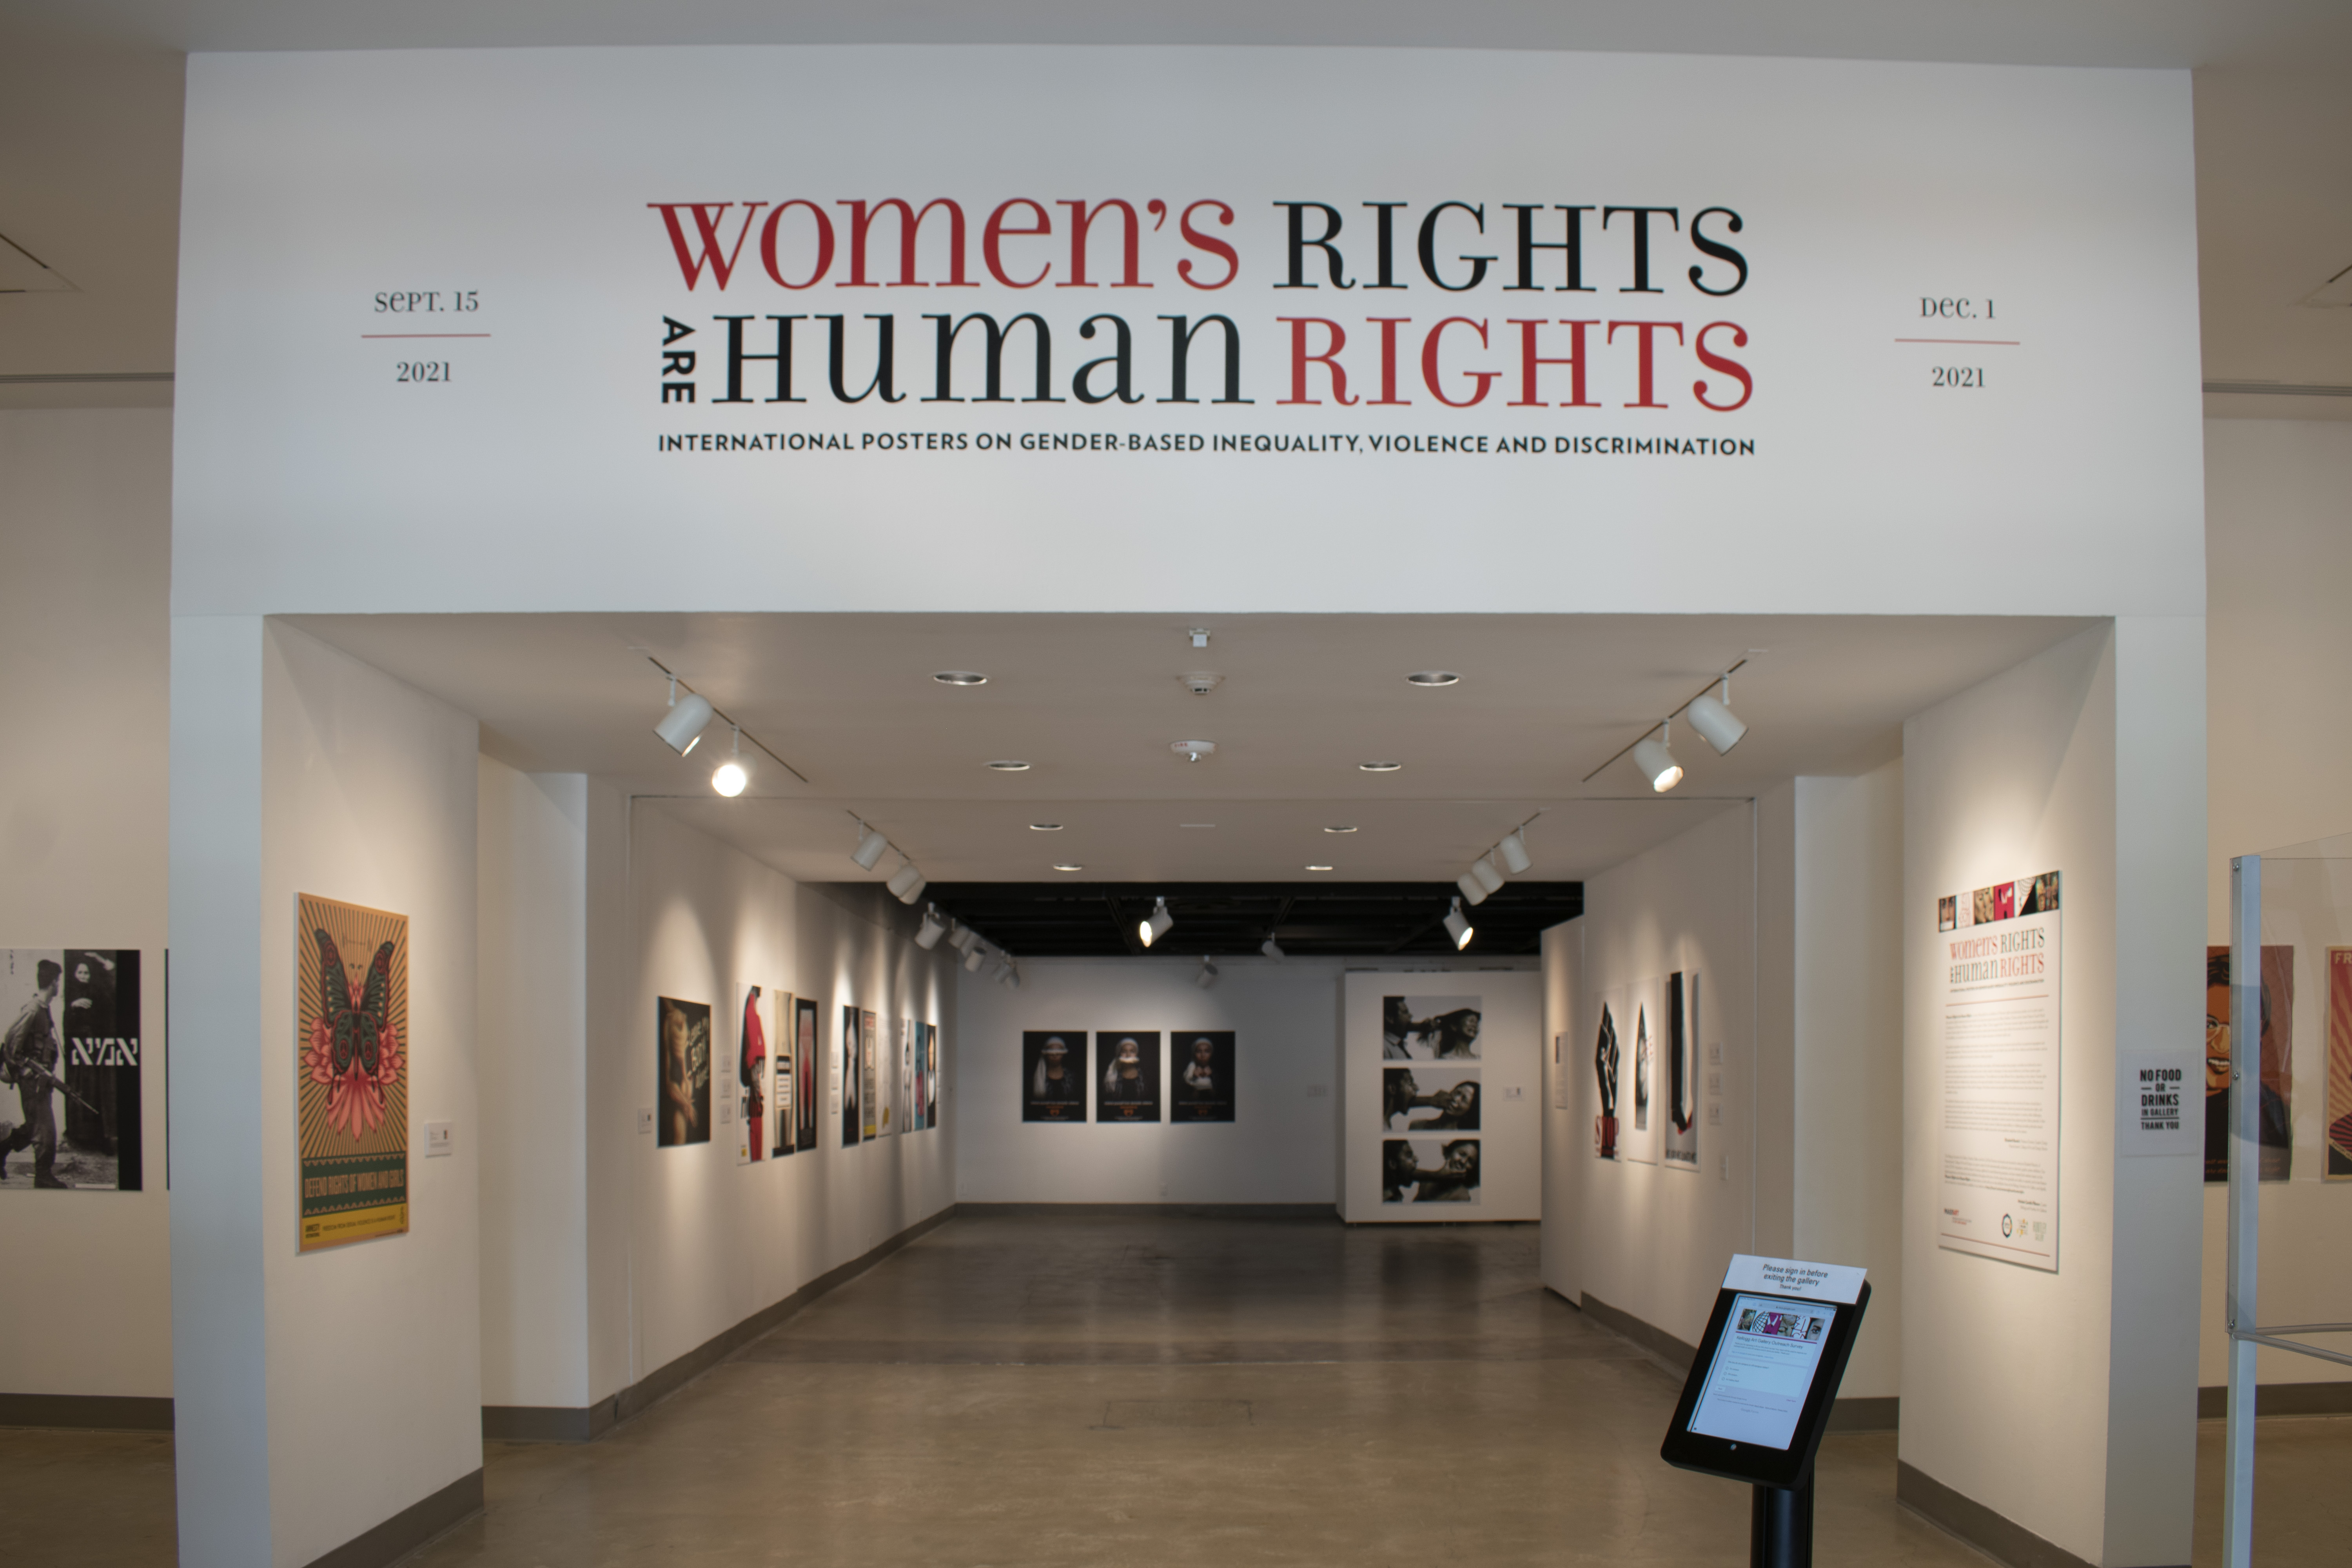 Installation View, Title Wall, Women's Rights are Human Rights Exhibition, Sept 15, 2021 to Dec 1, 2021